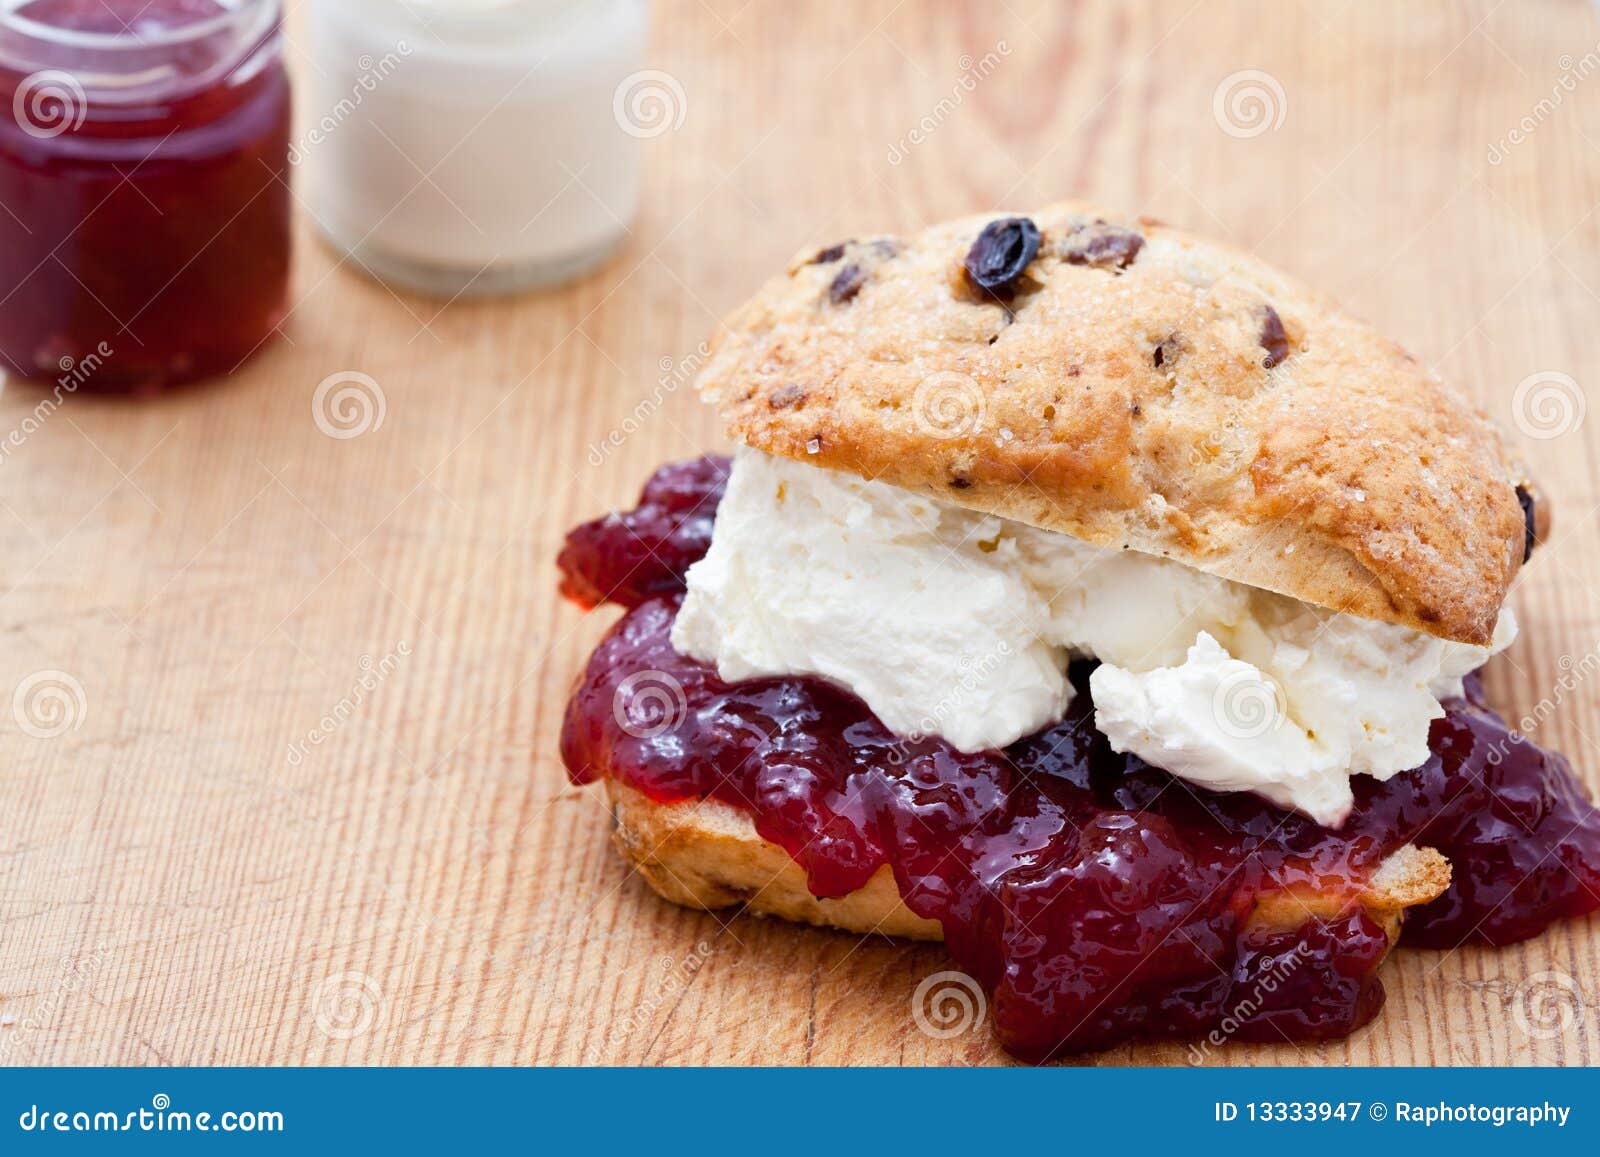 fresh home baked scone with jam and clotted cream